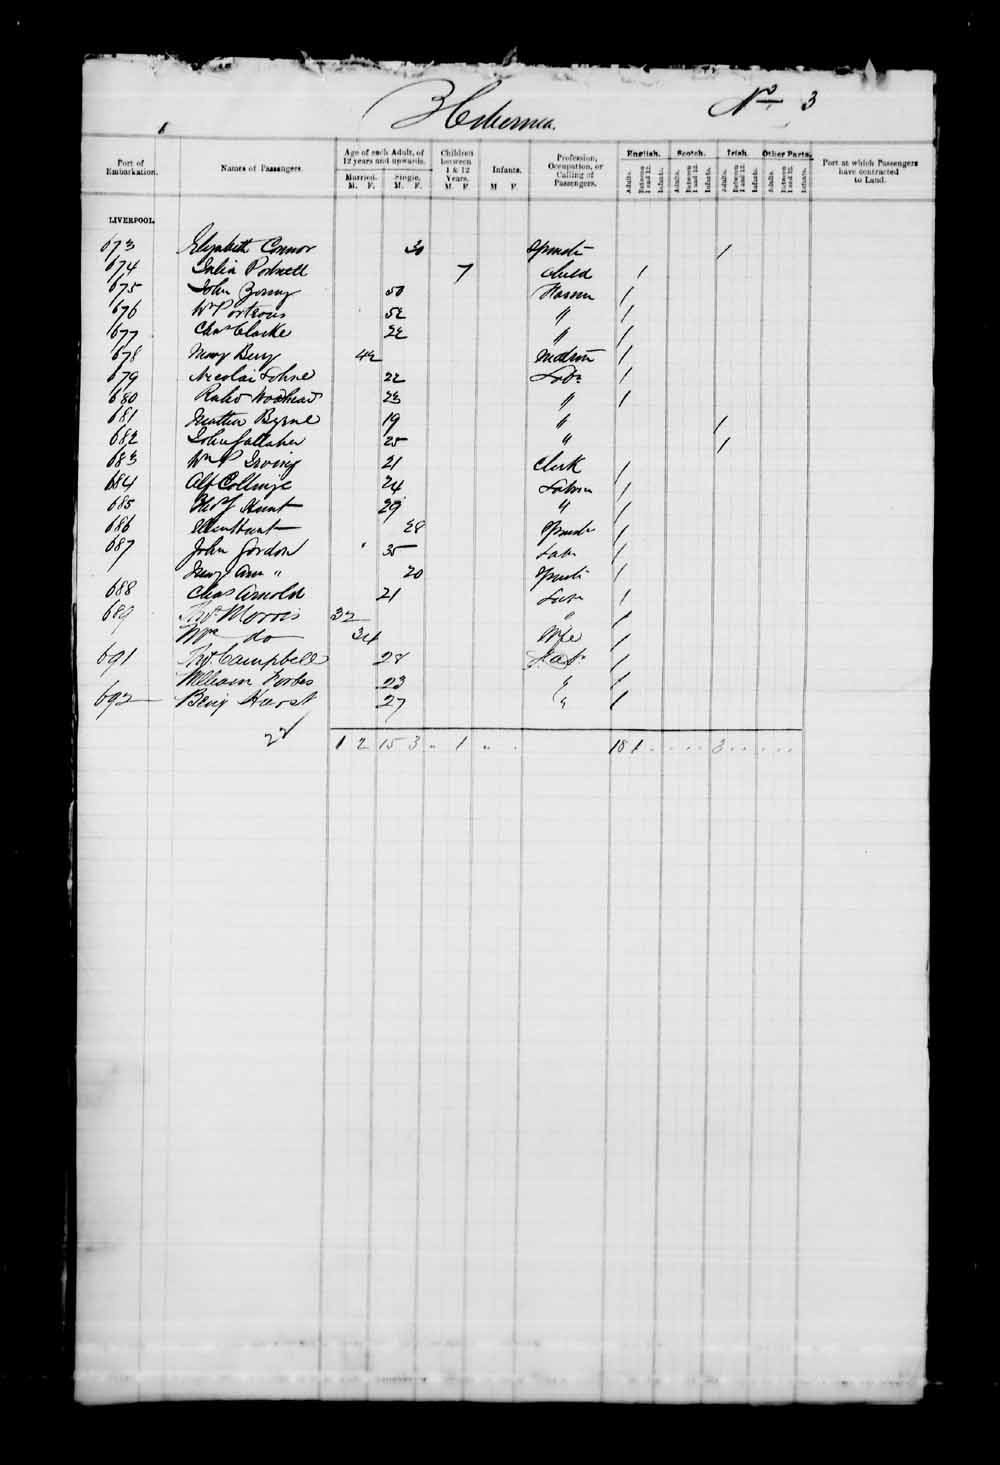 Digitized page of Passenger Lists for Image No.: e003530481